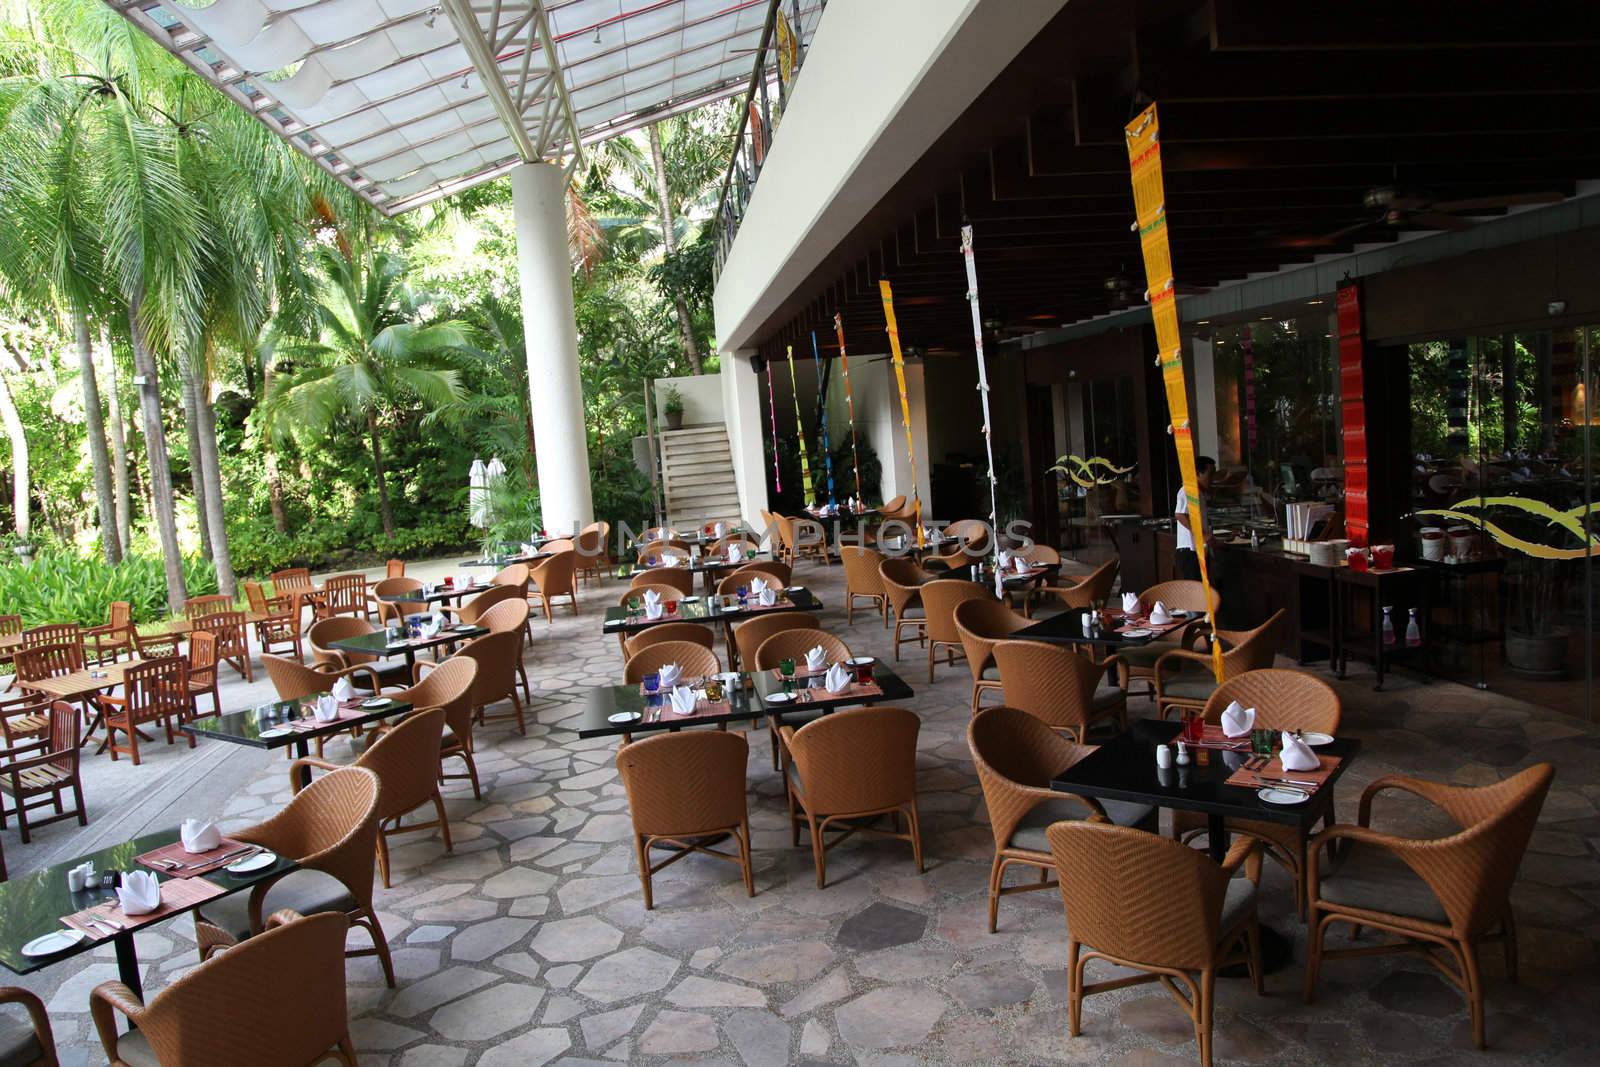 Outdoor seating area in a modern restaurant.